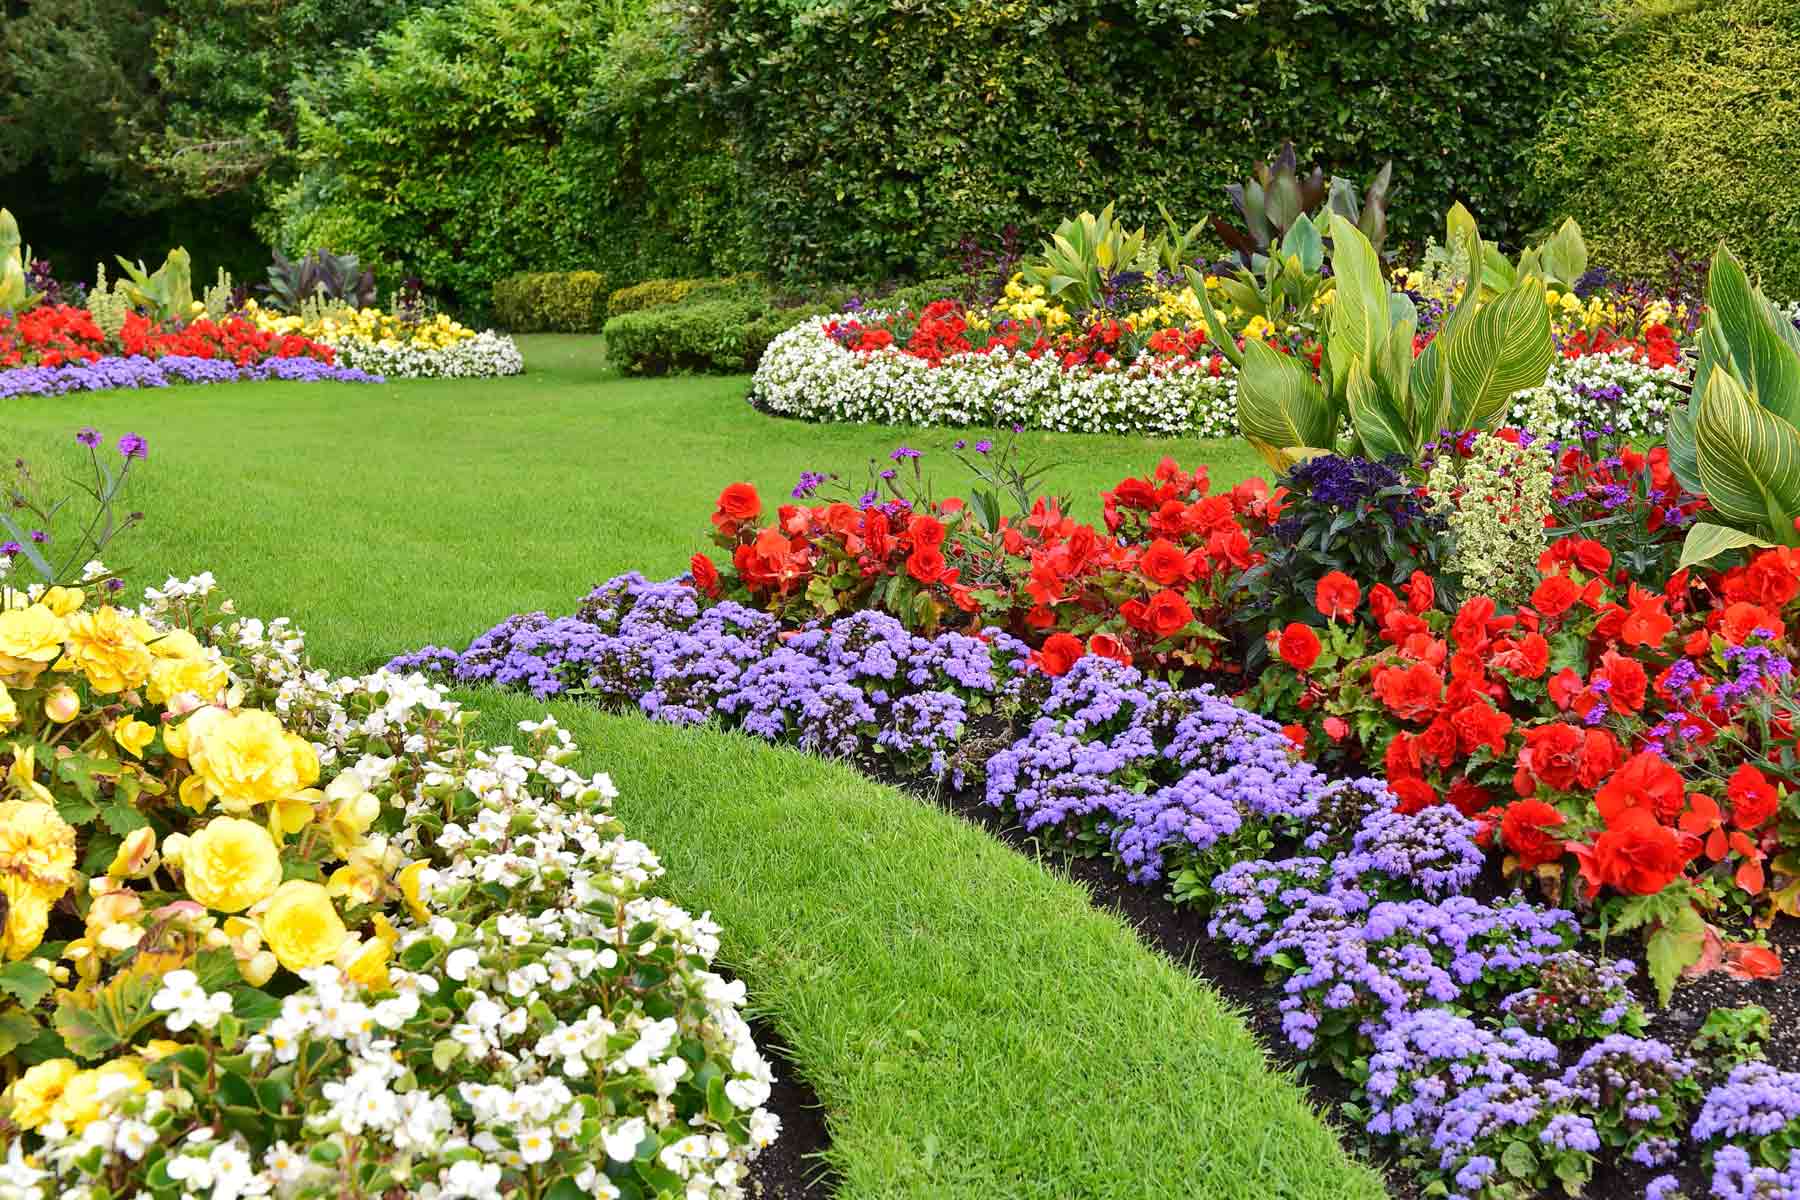 How Much Does It Cost to Create a Beautiful Flower Garden?